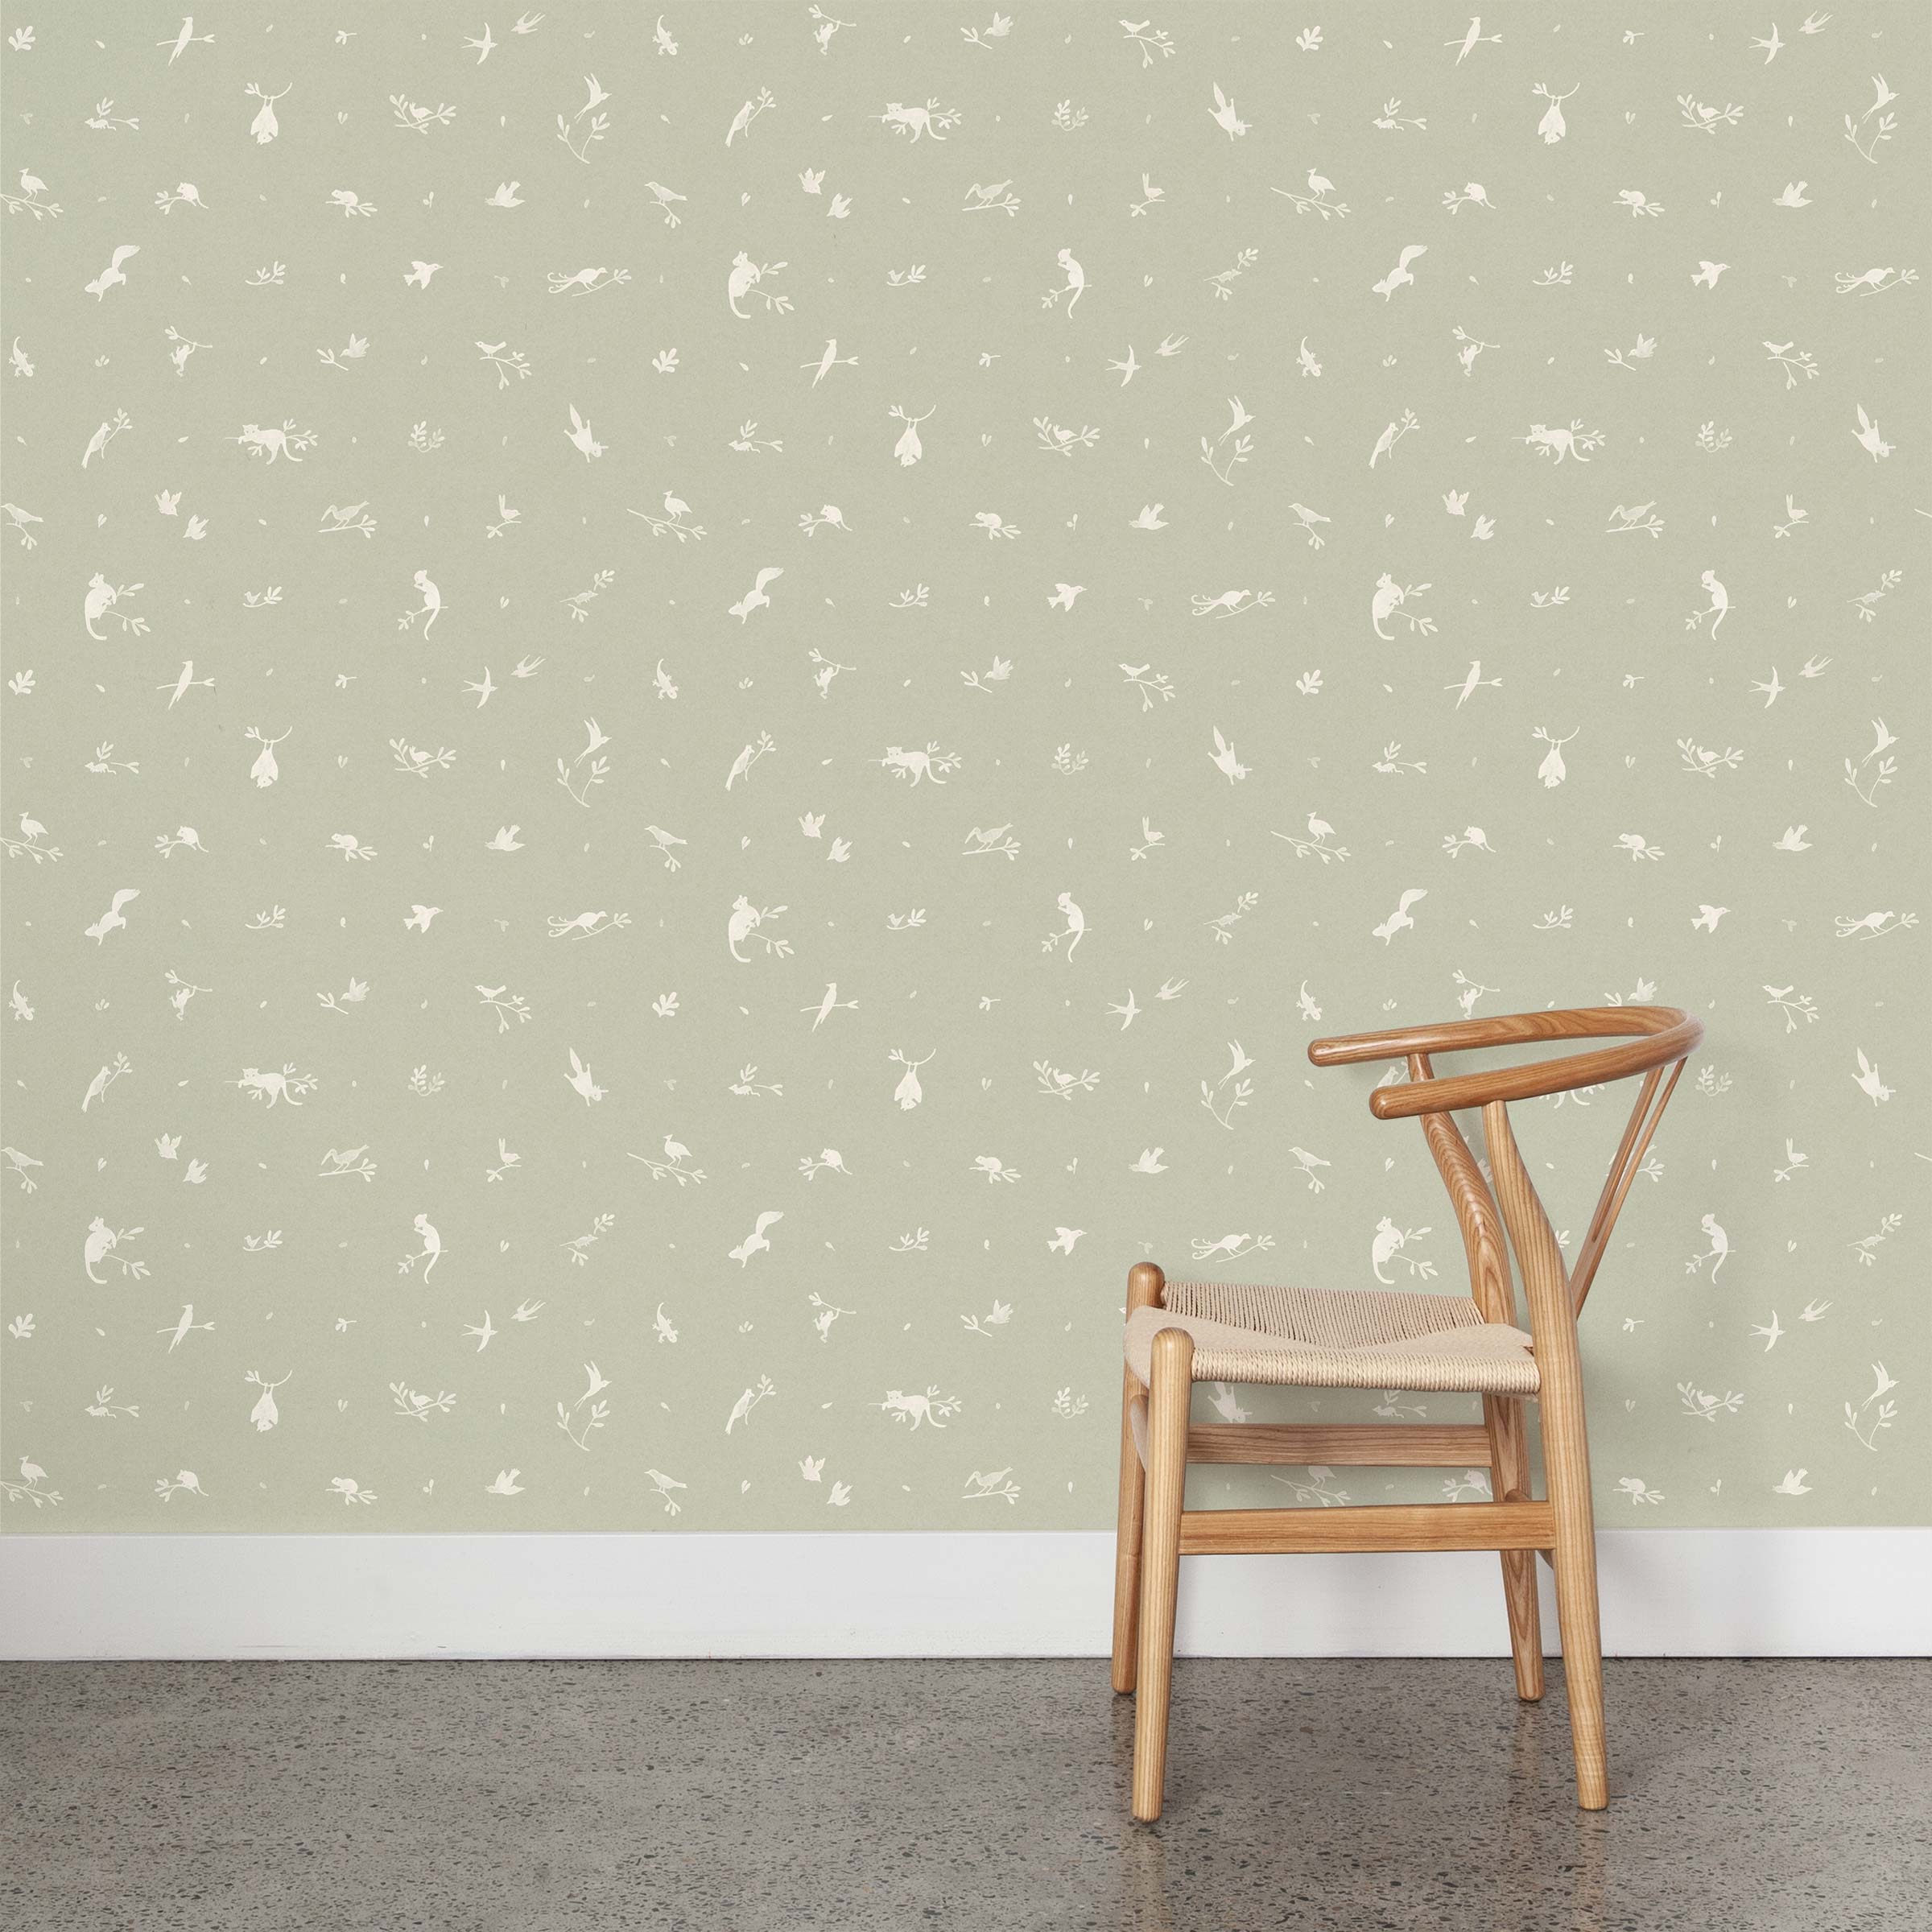 A wooden chair stands in front of a wall papered in a playful animal and branch print in white on a sage field.